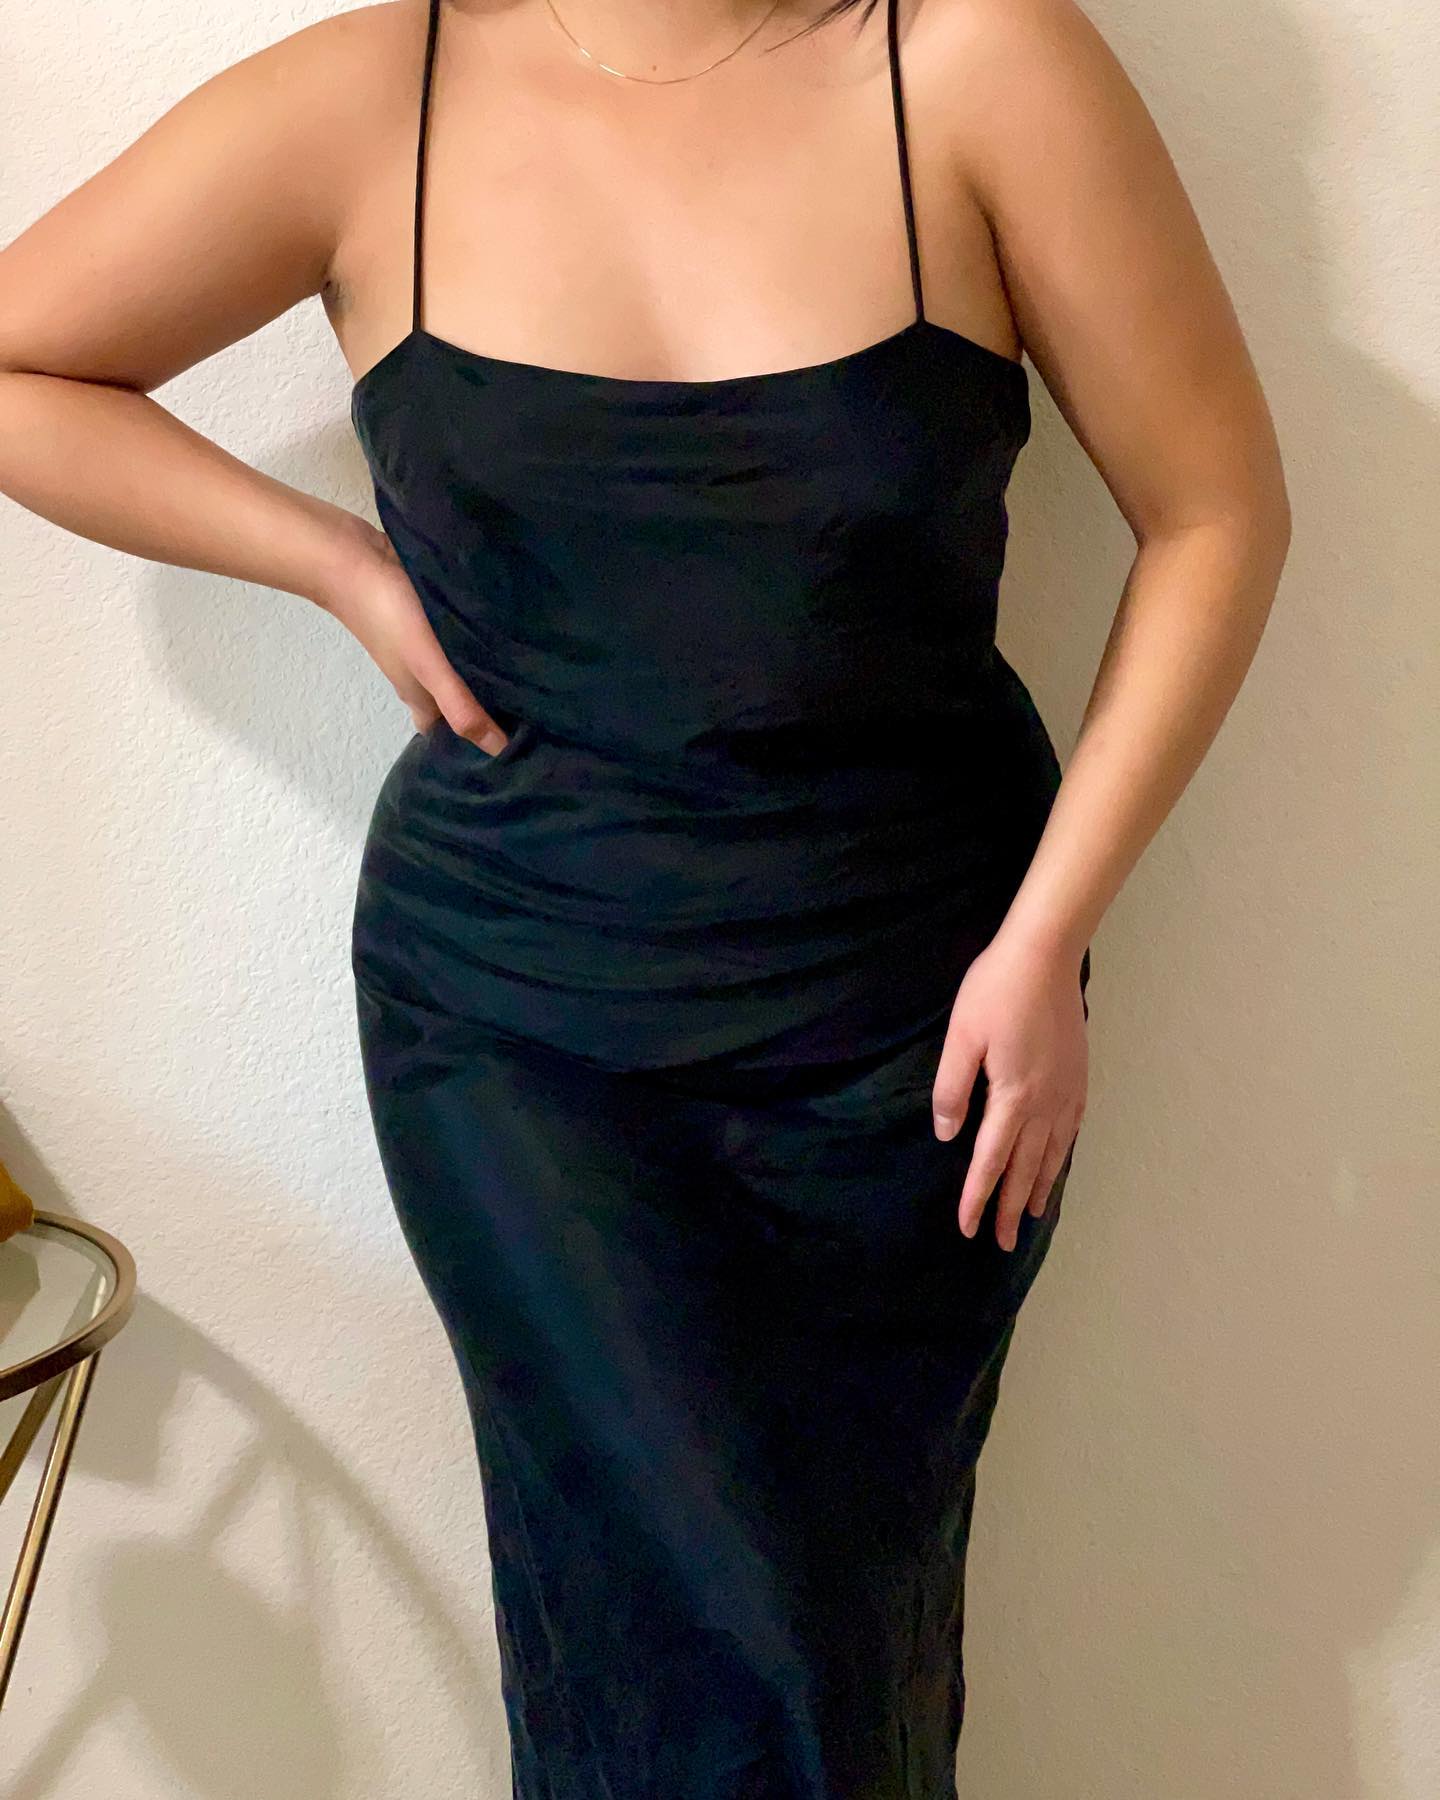 fashion influencer Marina Torres poses for a close-up wearing a classic black slip dress